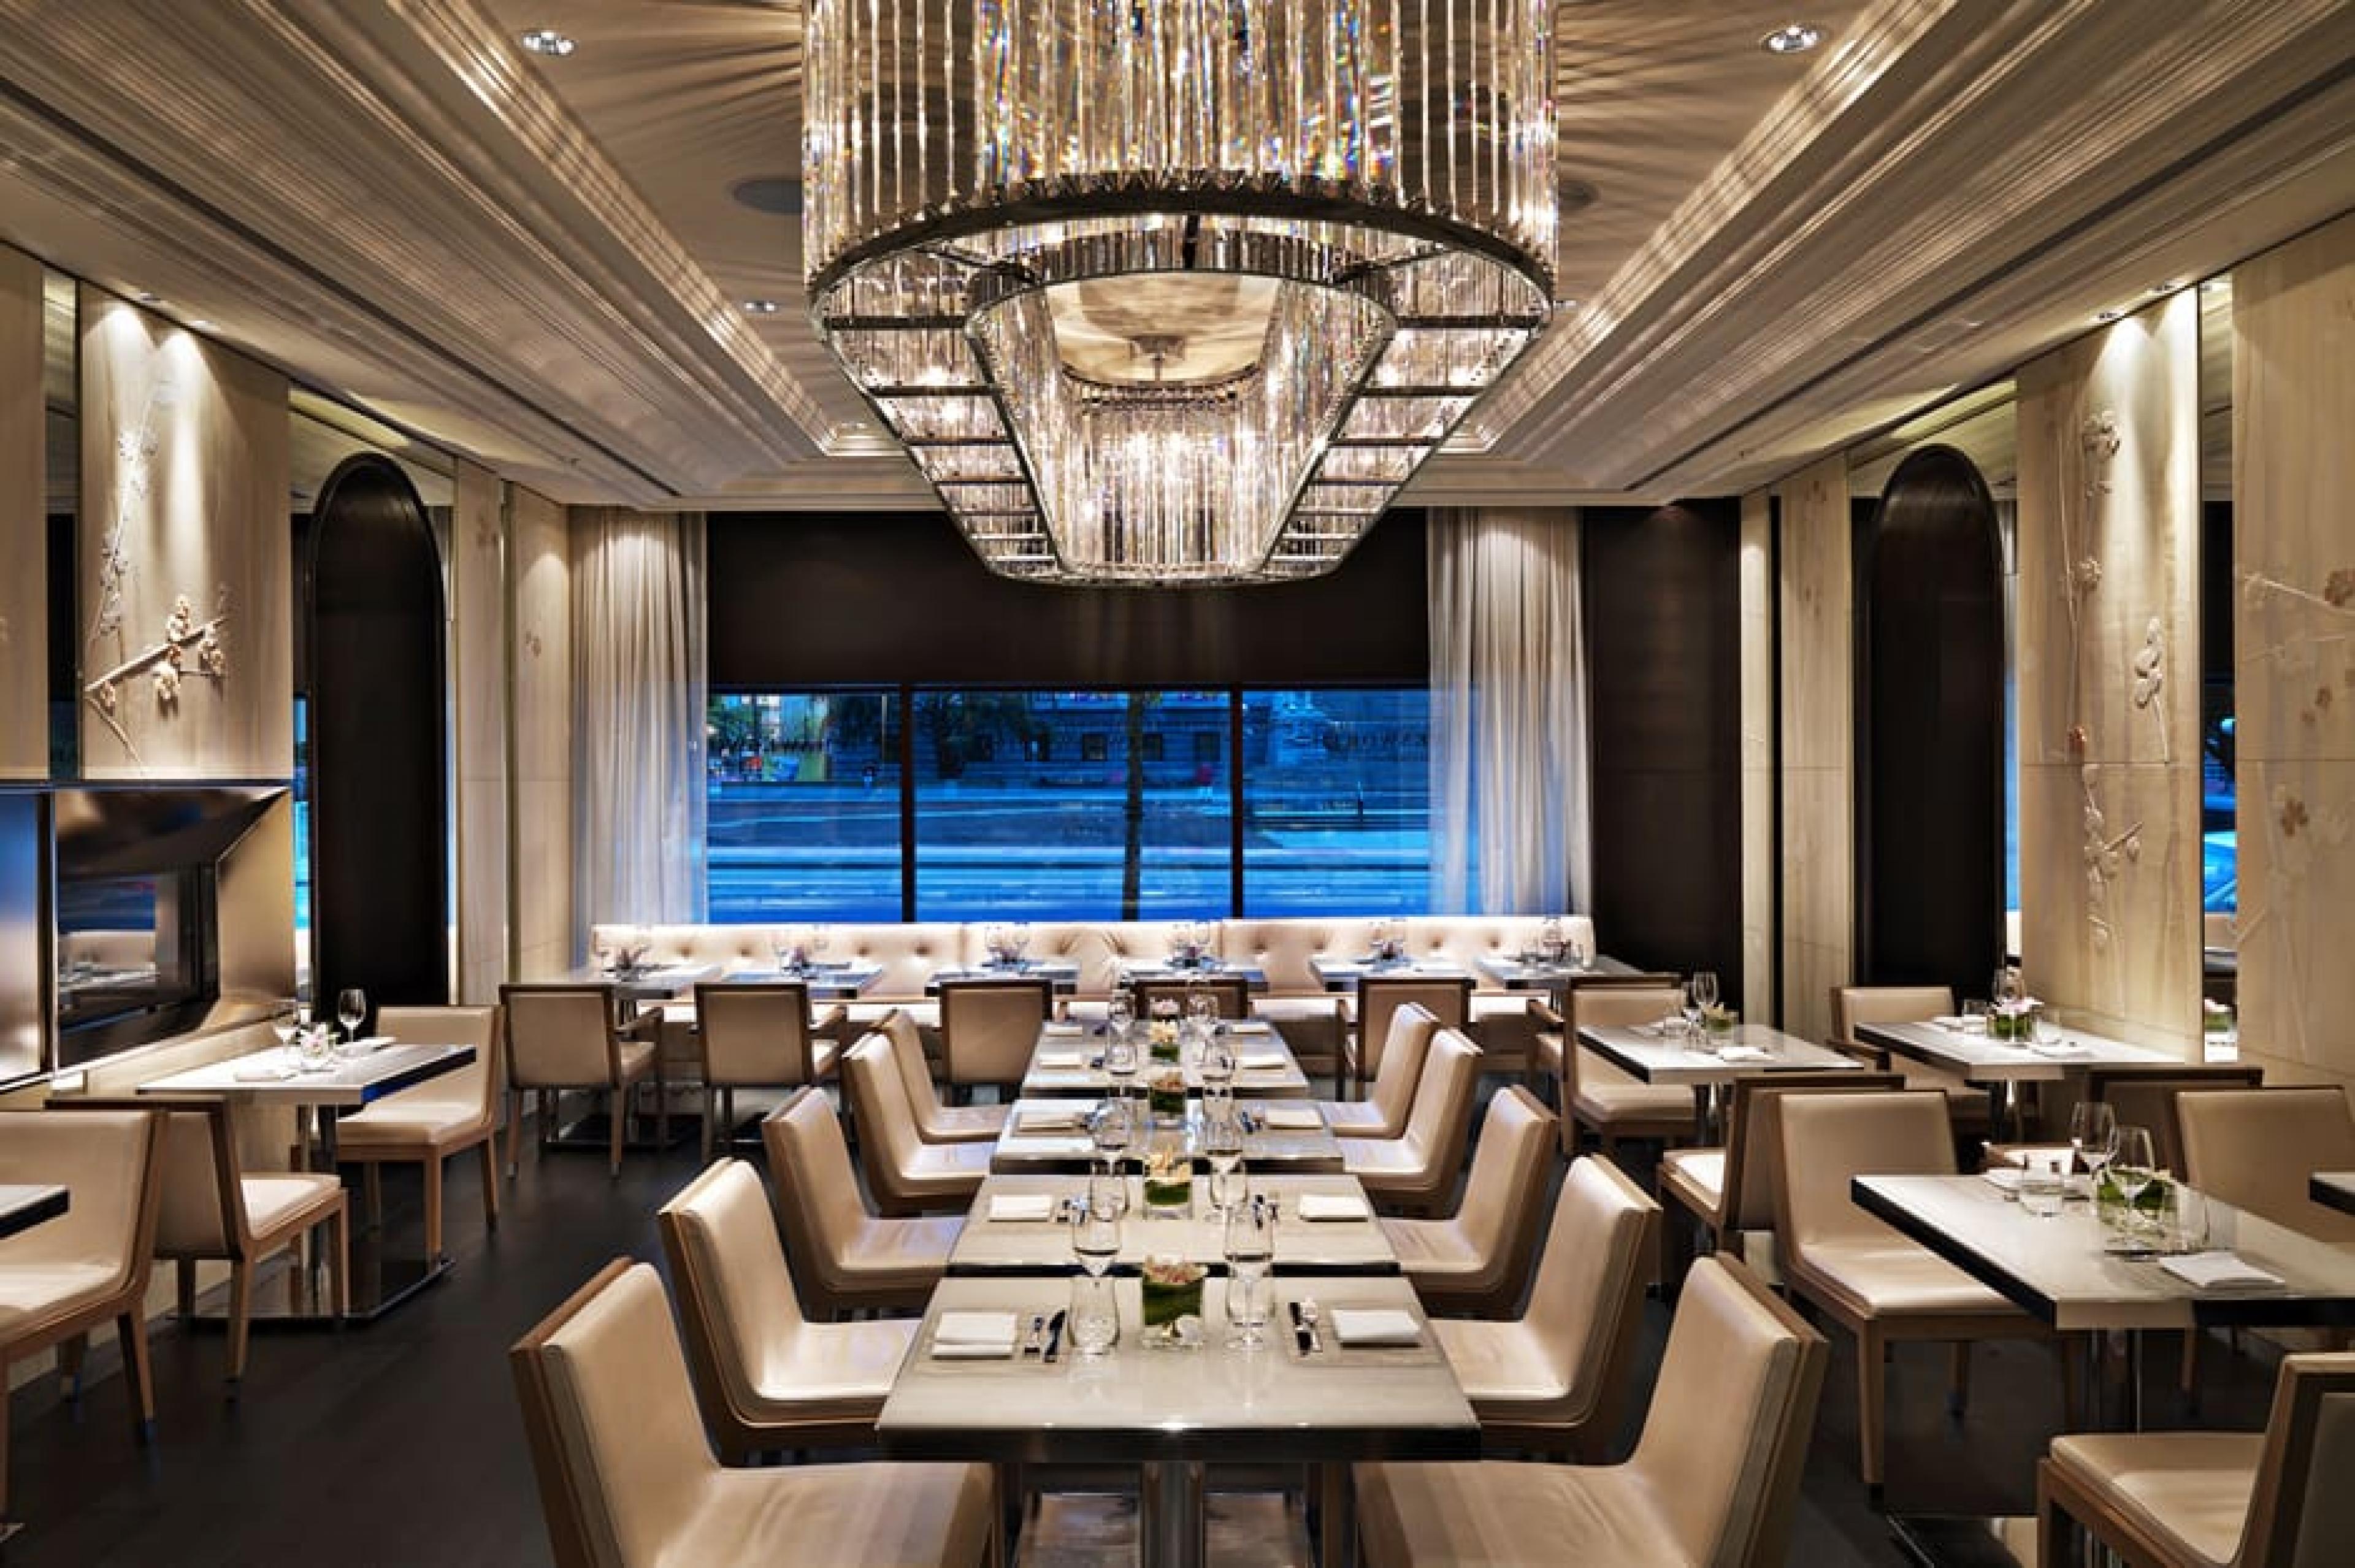 Dinning Area at Hawksworth Restaurant, Vancouver, Canada